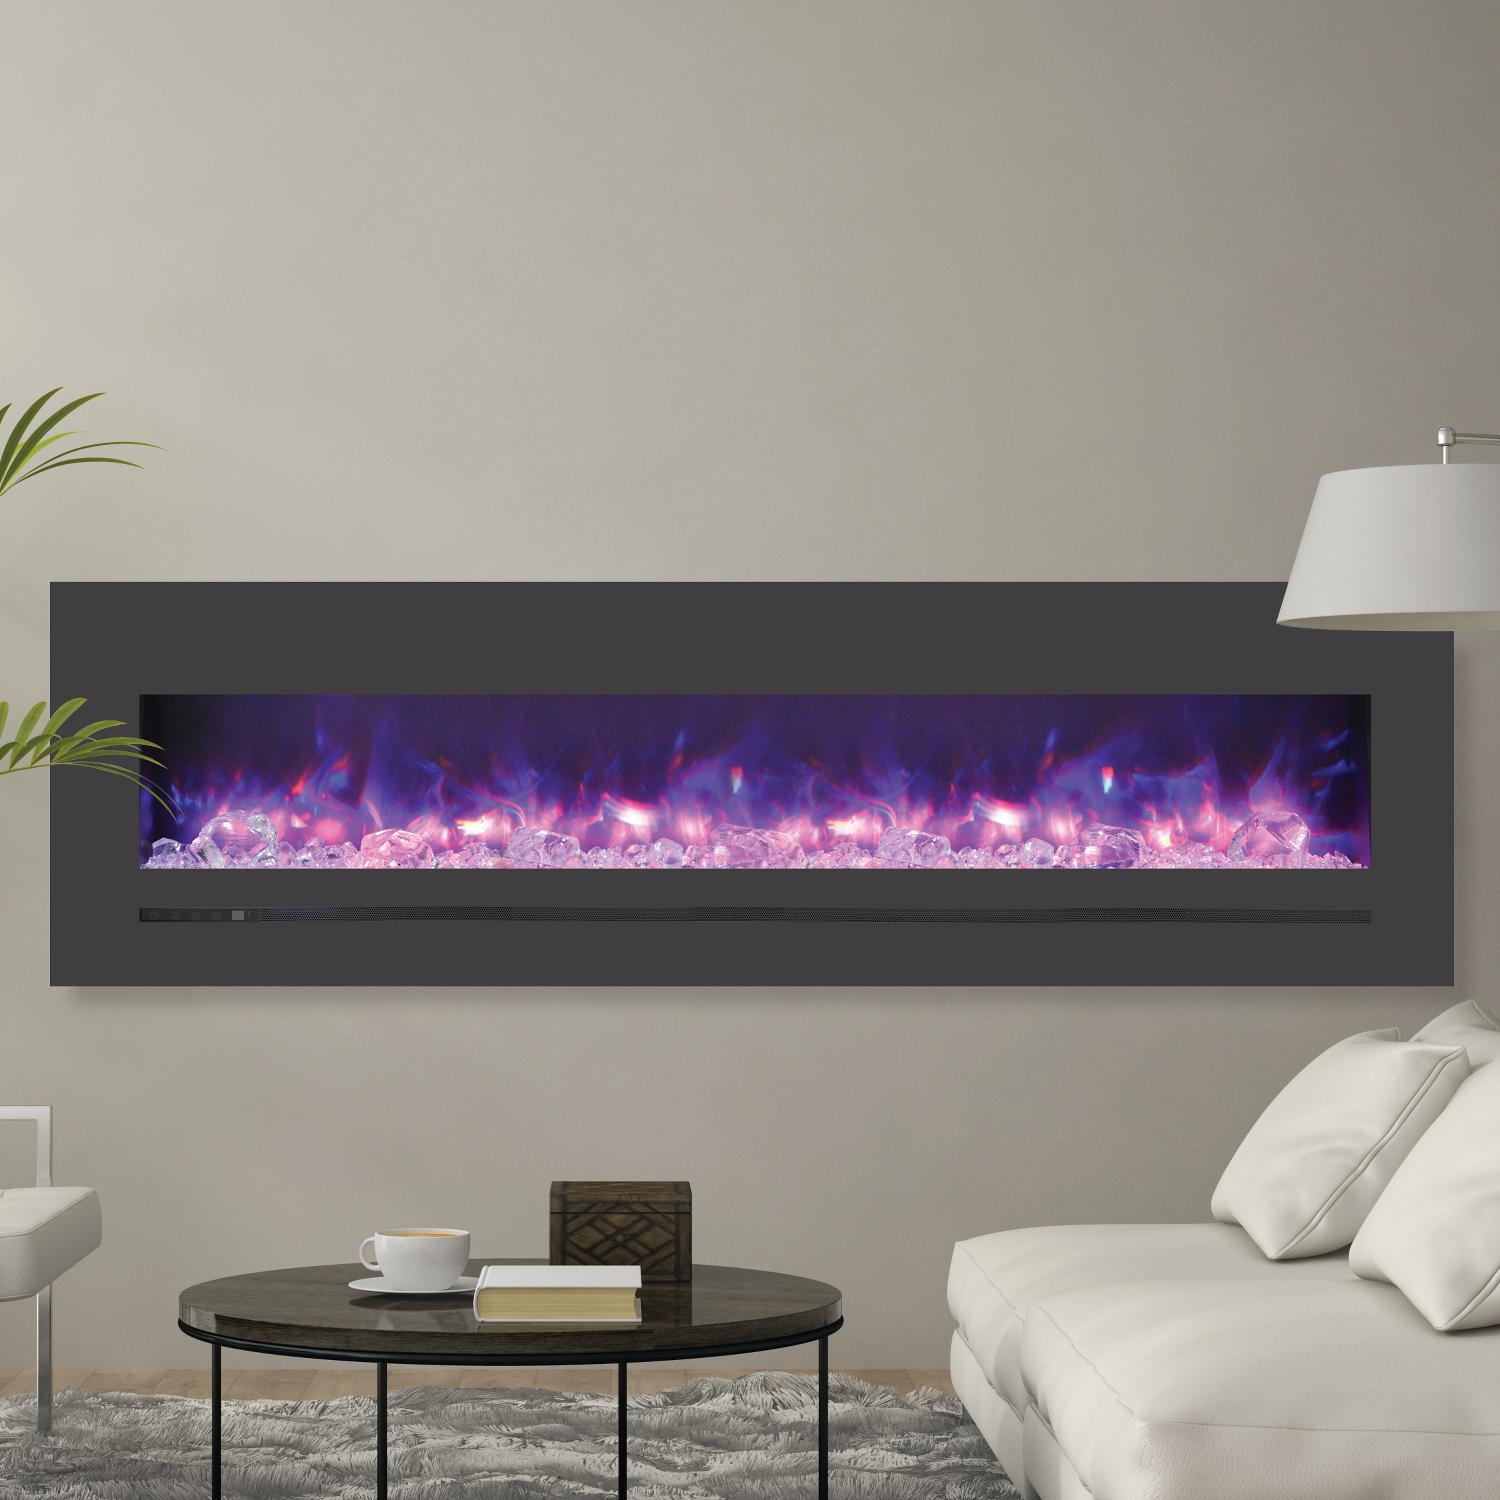 72 Inch Fireplace Best Of Sierra Flame by Amantii Wall Mount Flush Mount 72" Electric